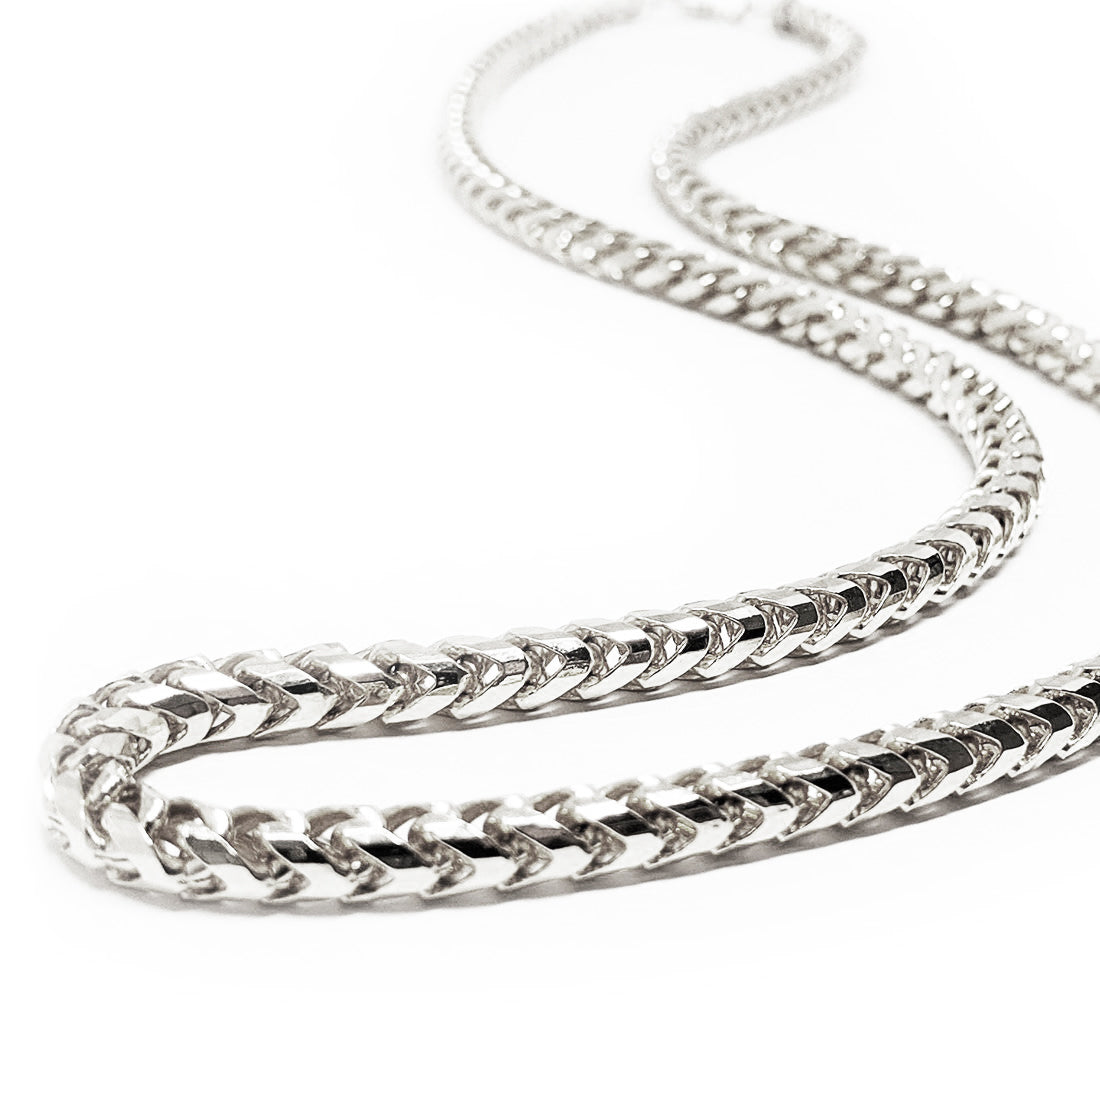 3mm Diamond Cut Franco Chain, 14K White Gold, Proclamation Jewelry 24 / Luxury Lobster Clasp